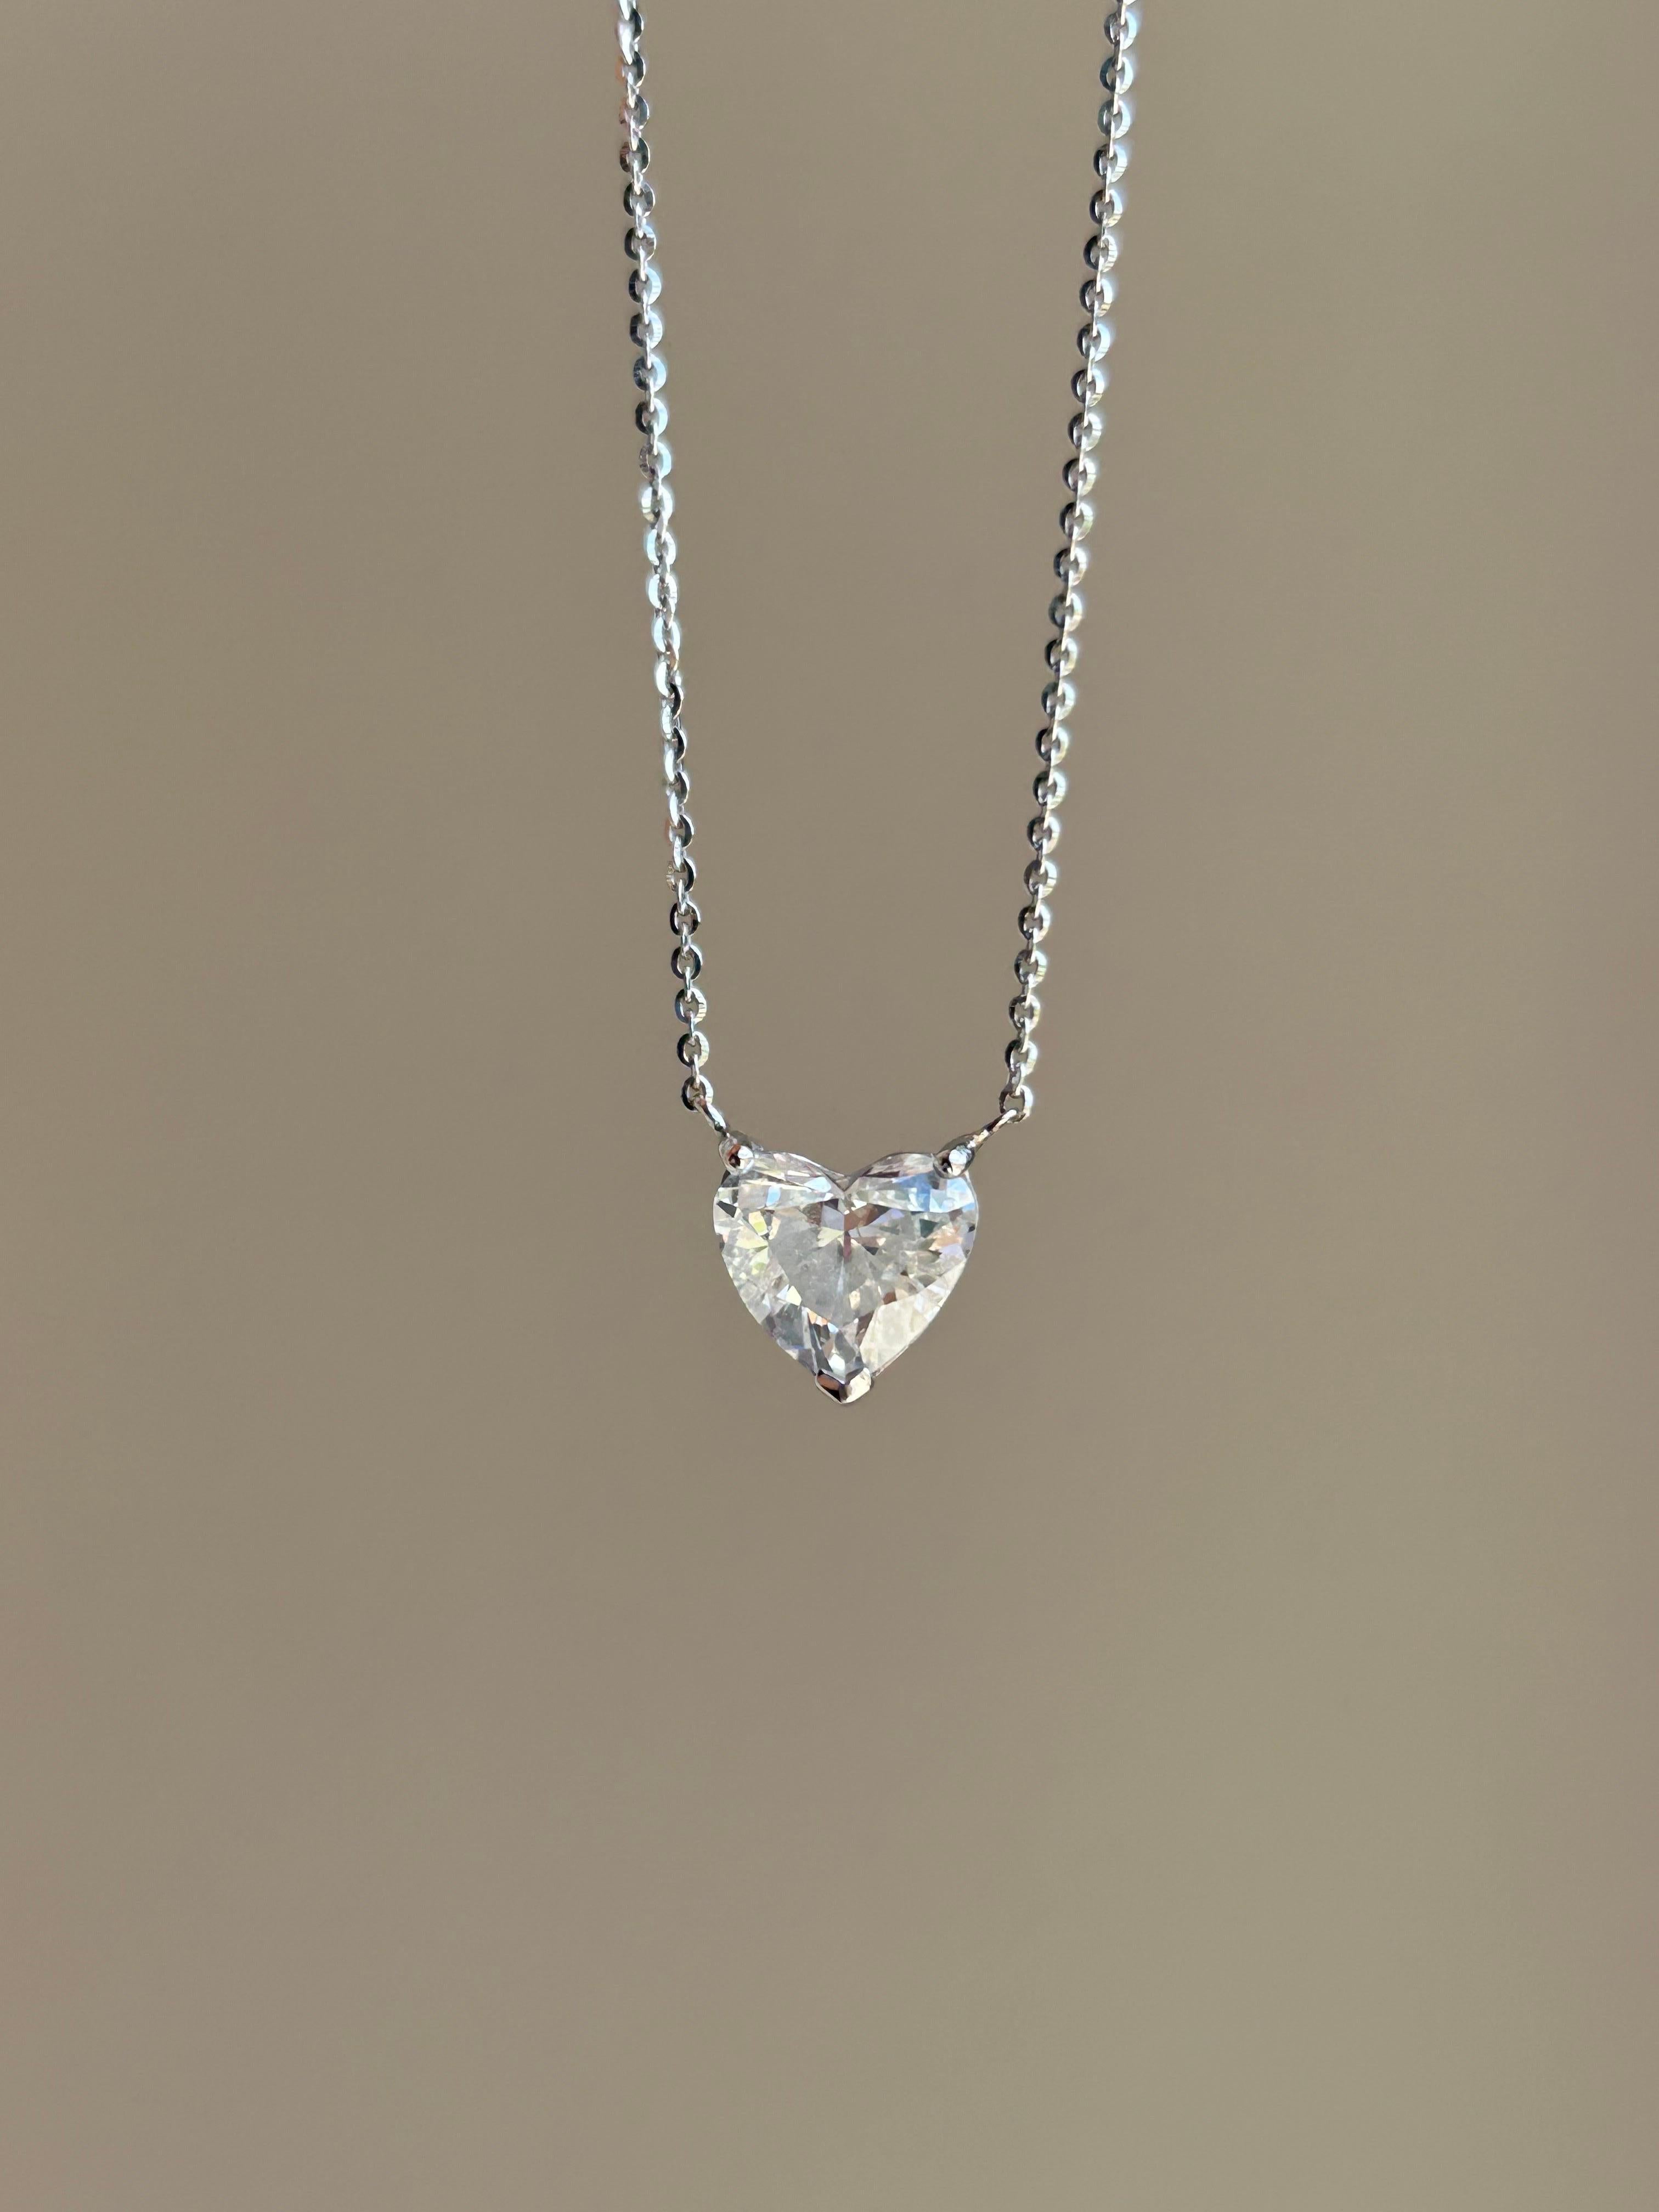 A classic solitaire pendant necklace, with a perfectly cut 1.66 carat heart shape White Diamond, HRD certified, G color, SI2 clarity. The inclusion is minor, and not on the table - making the heart shape diamond look shiny, and the perfectly cut